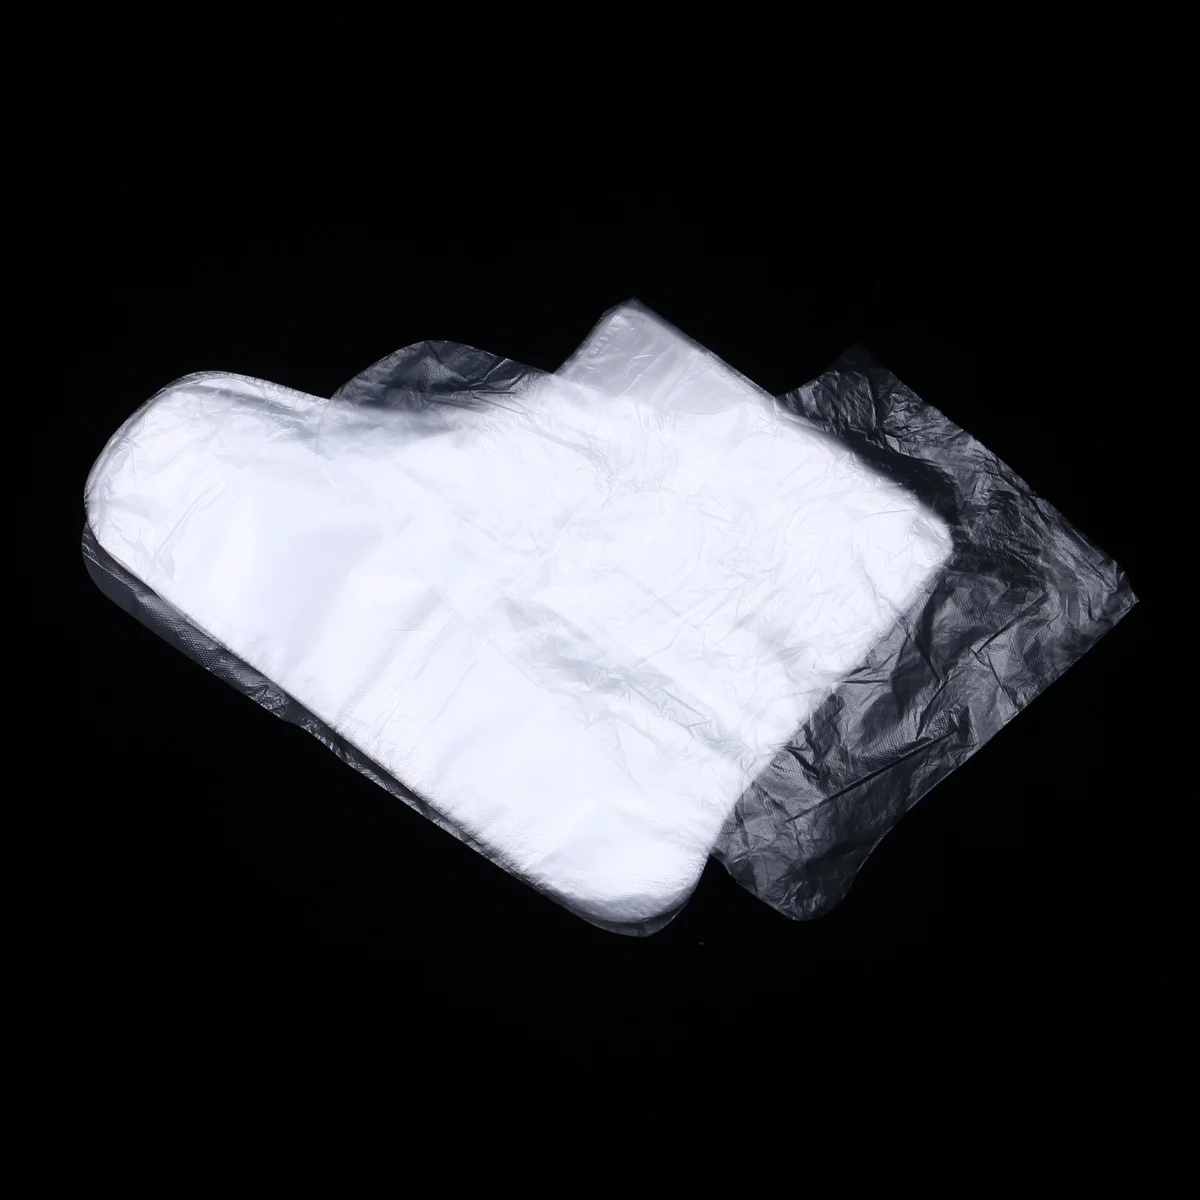 

200 Covers Covers Transparent Shoes Cover Shoes Cover Paraffin Bath Liner Booties for Men